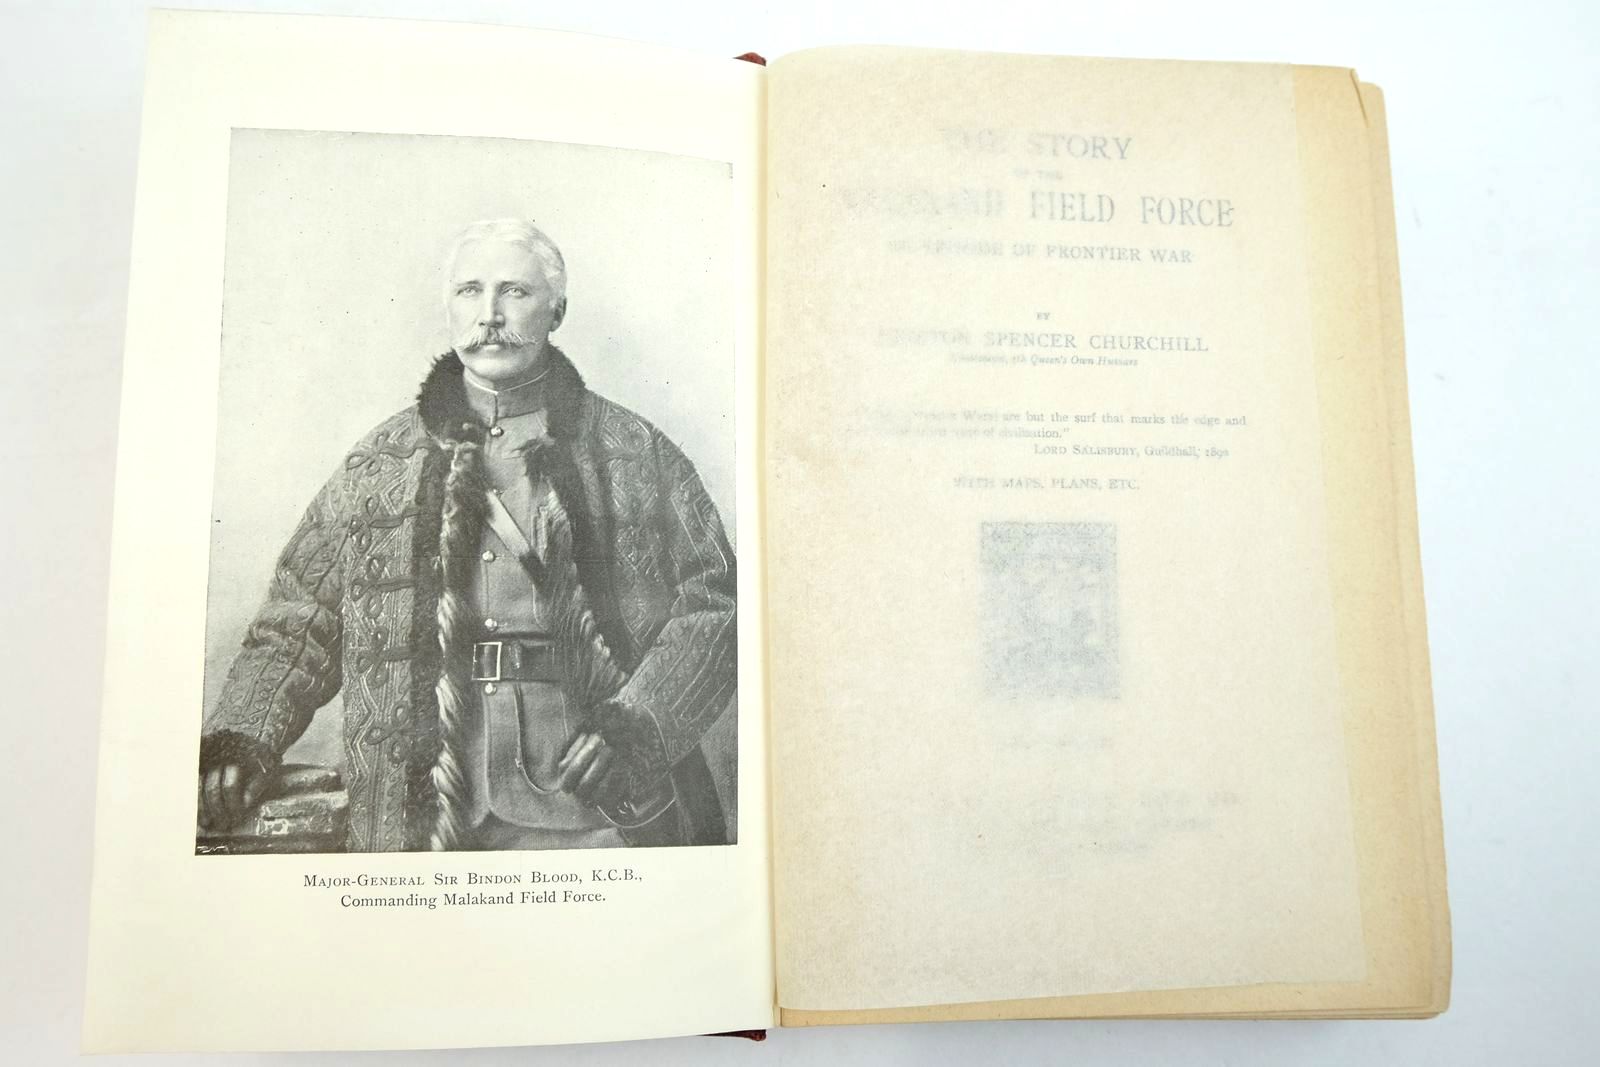 Photo of THE STORY OF THE MALAKAND FIELD FORCE: AN EPISODE OF FRONTIER WAR written by Churchill, Winston S. published by Longmans, Green & Co. (STOCK CODE: 2134640)  for sale by Stella & Rose's Books